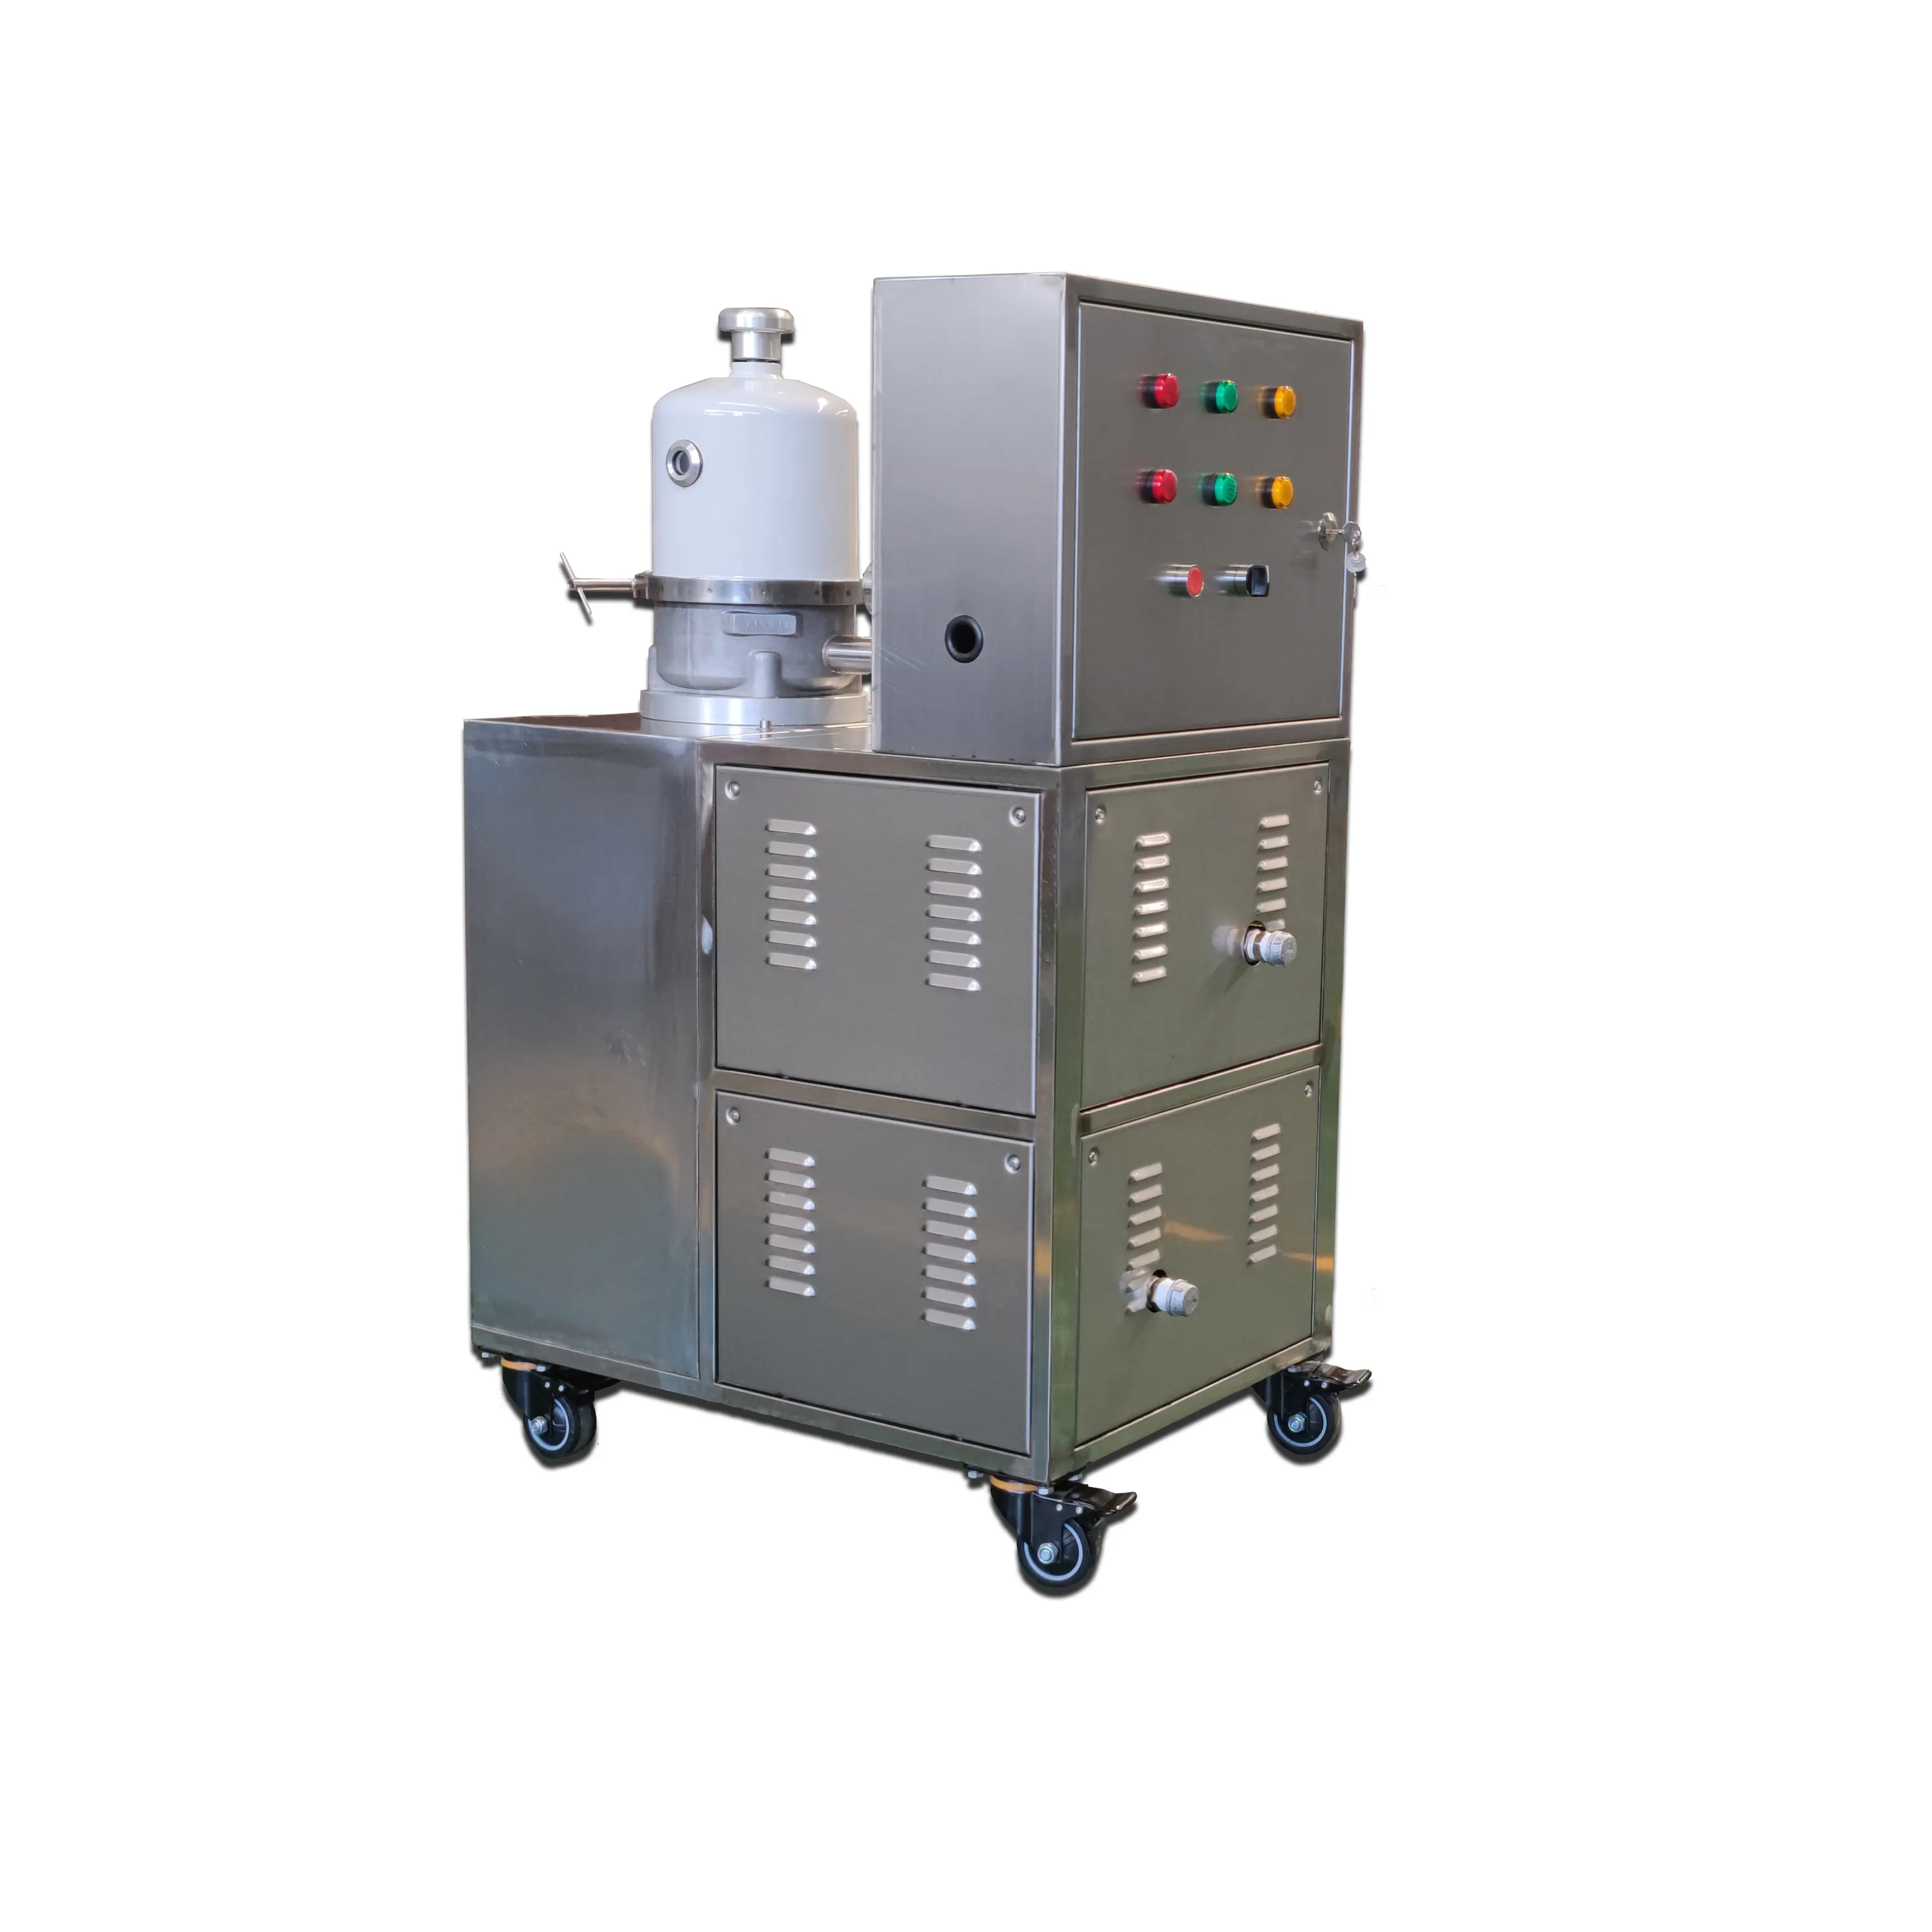 Oil purification machine for grinding oil